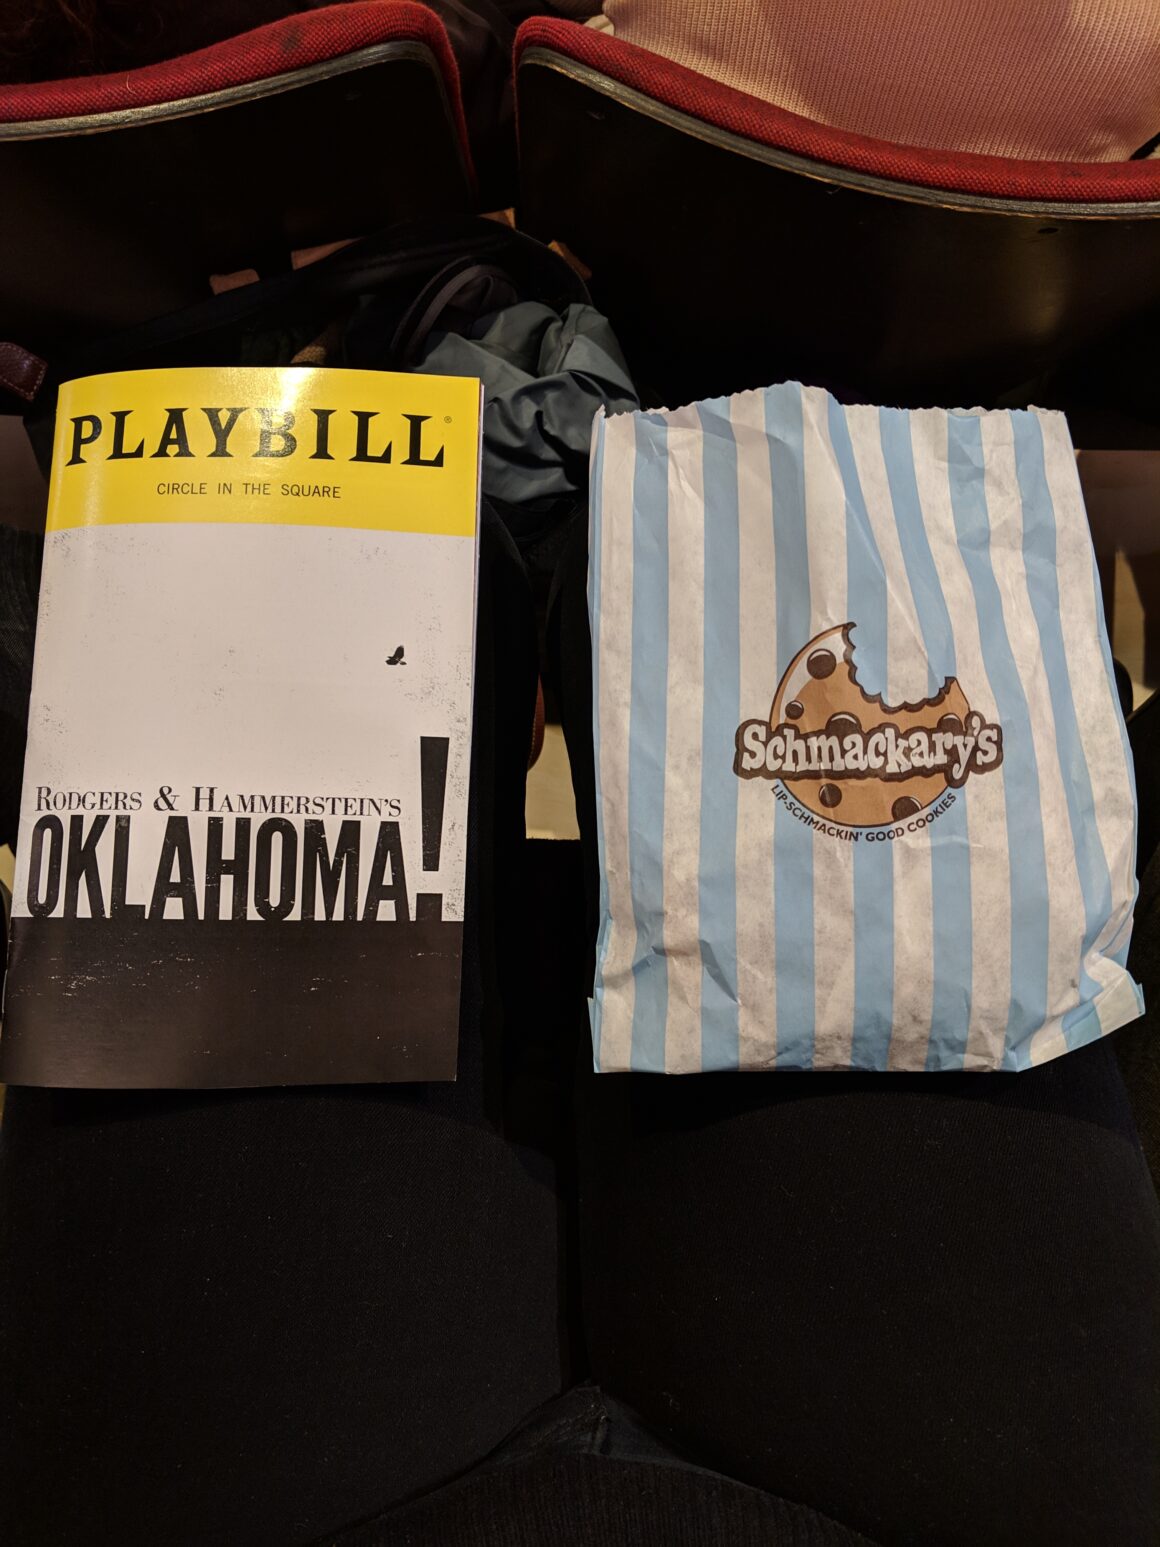 An Oklahoma! playbill sits on a lap next to a stripped bag with cookies